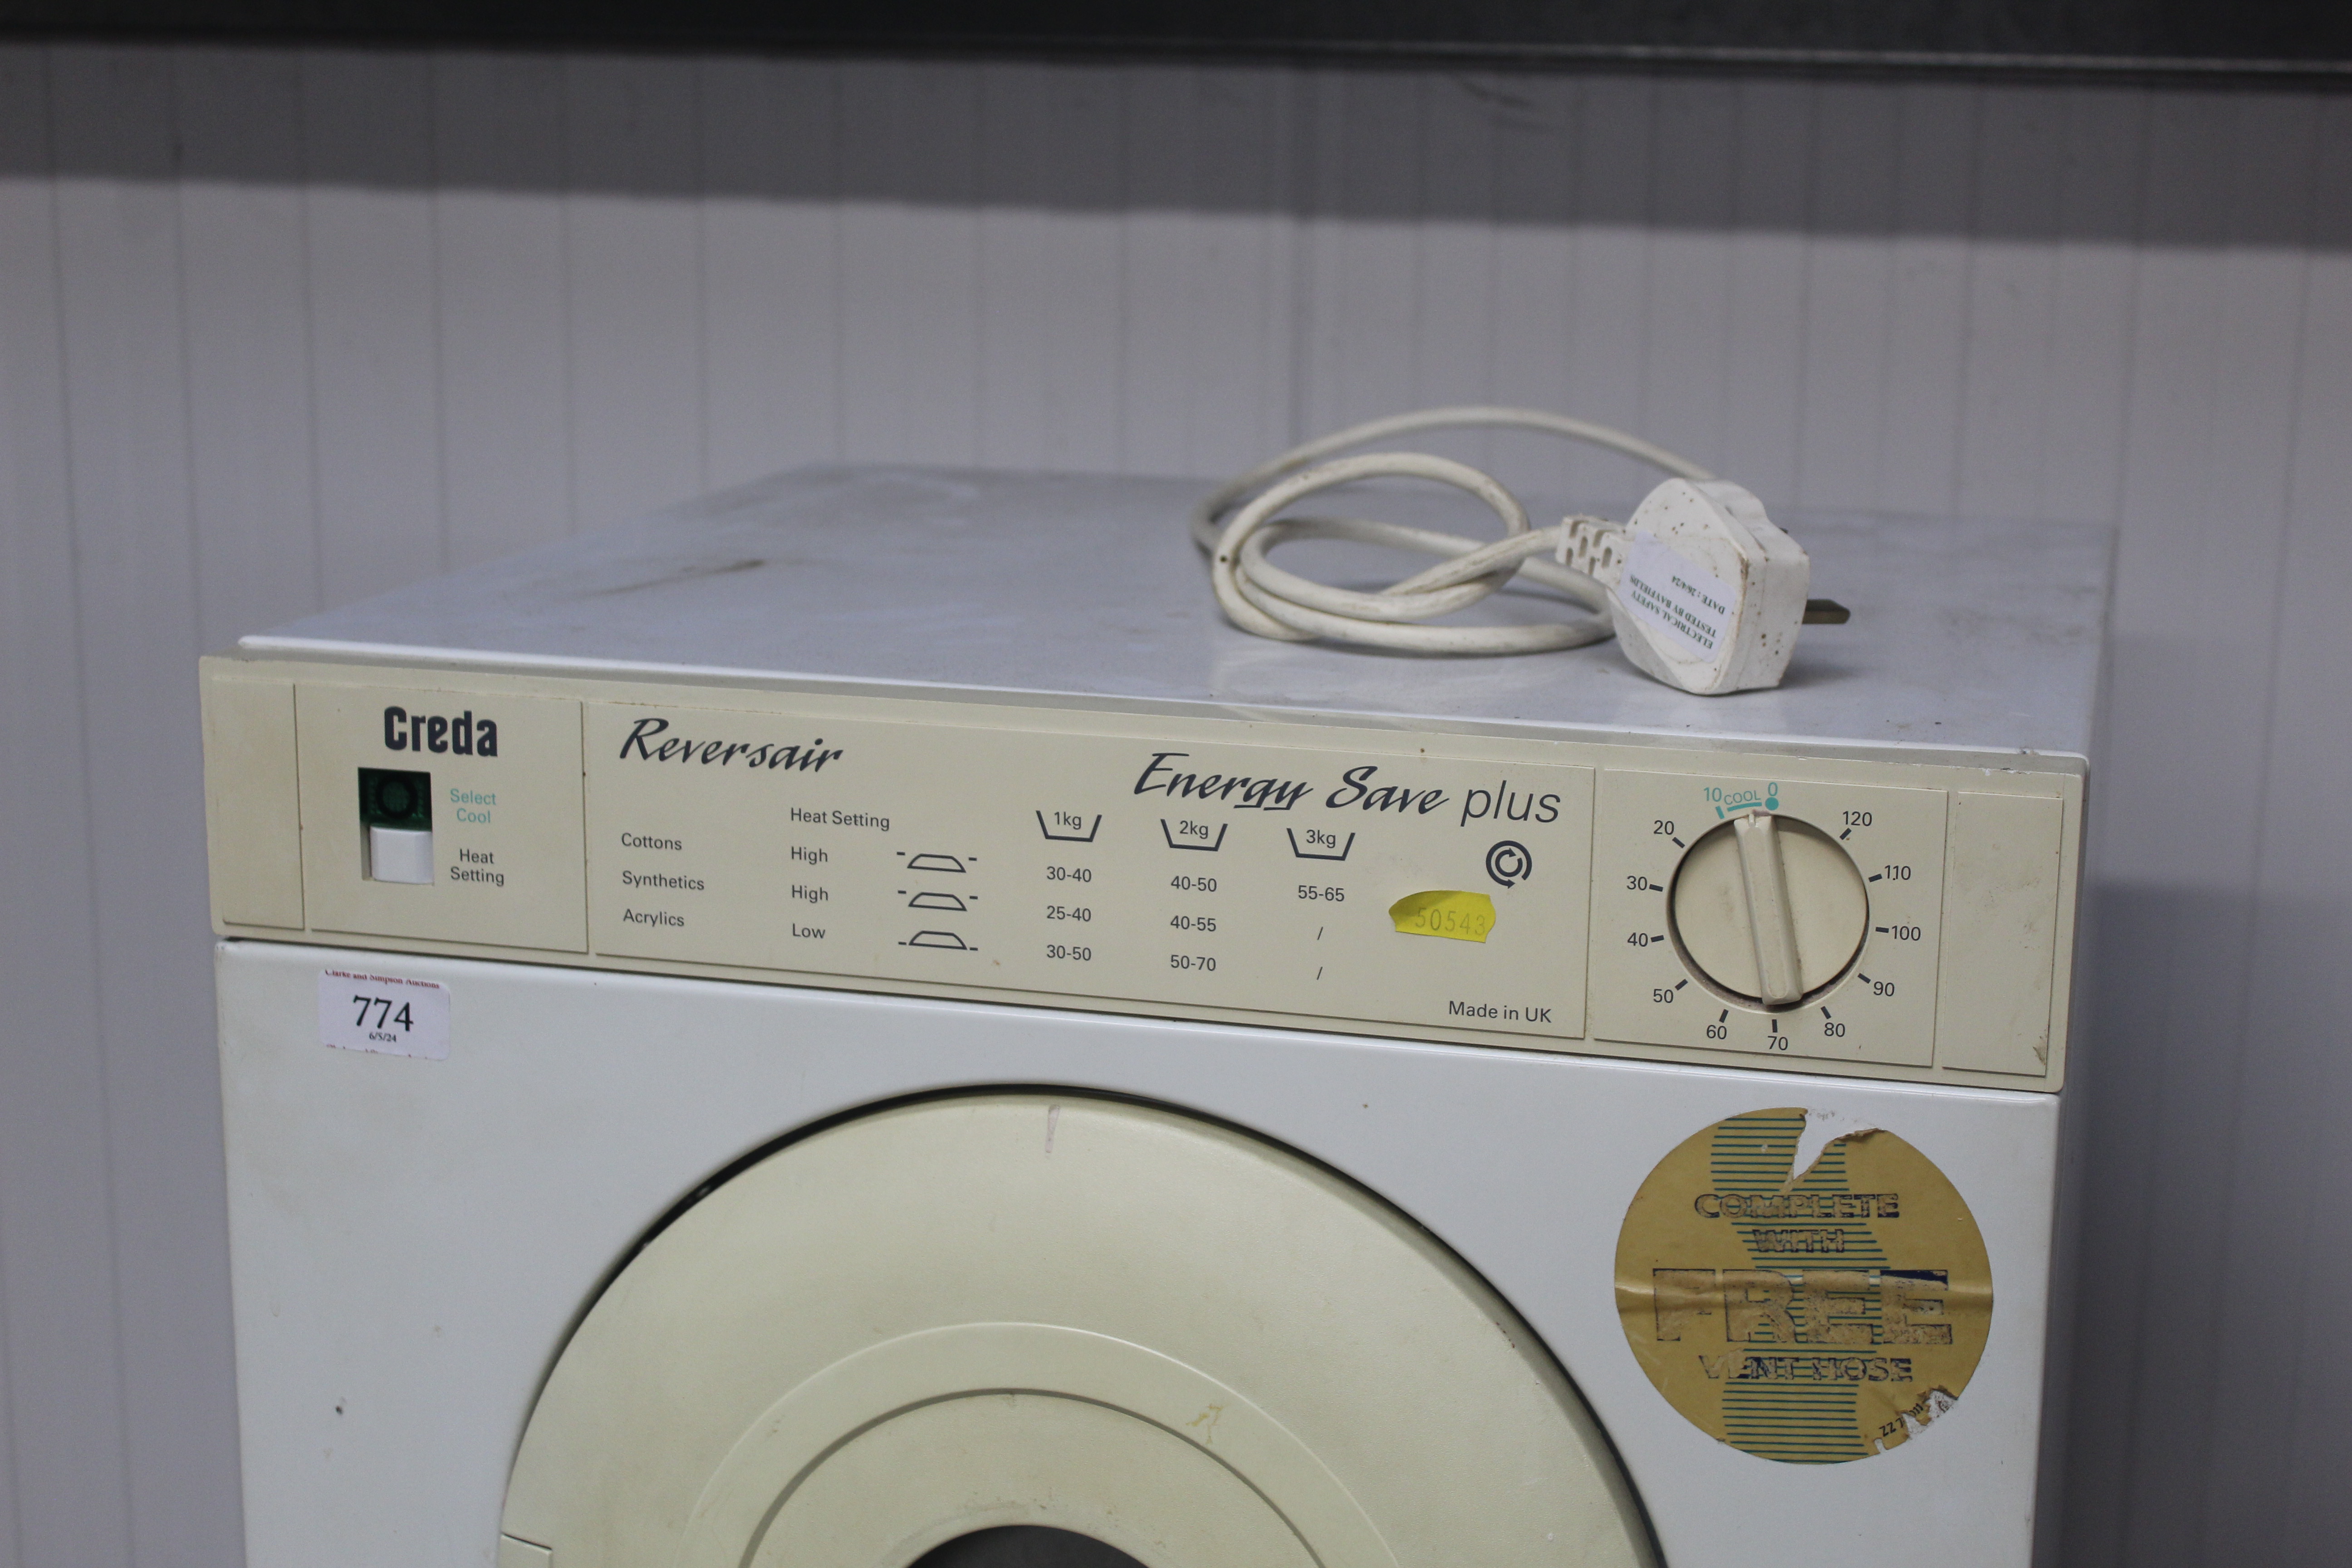 A Creda spin dryer - Image 2 of 3